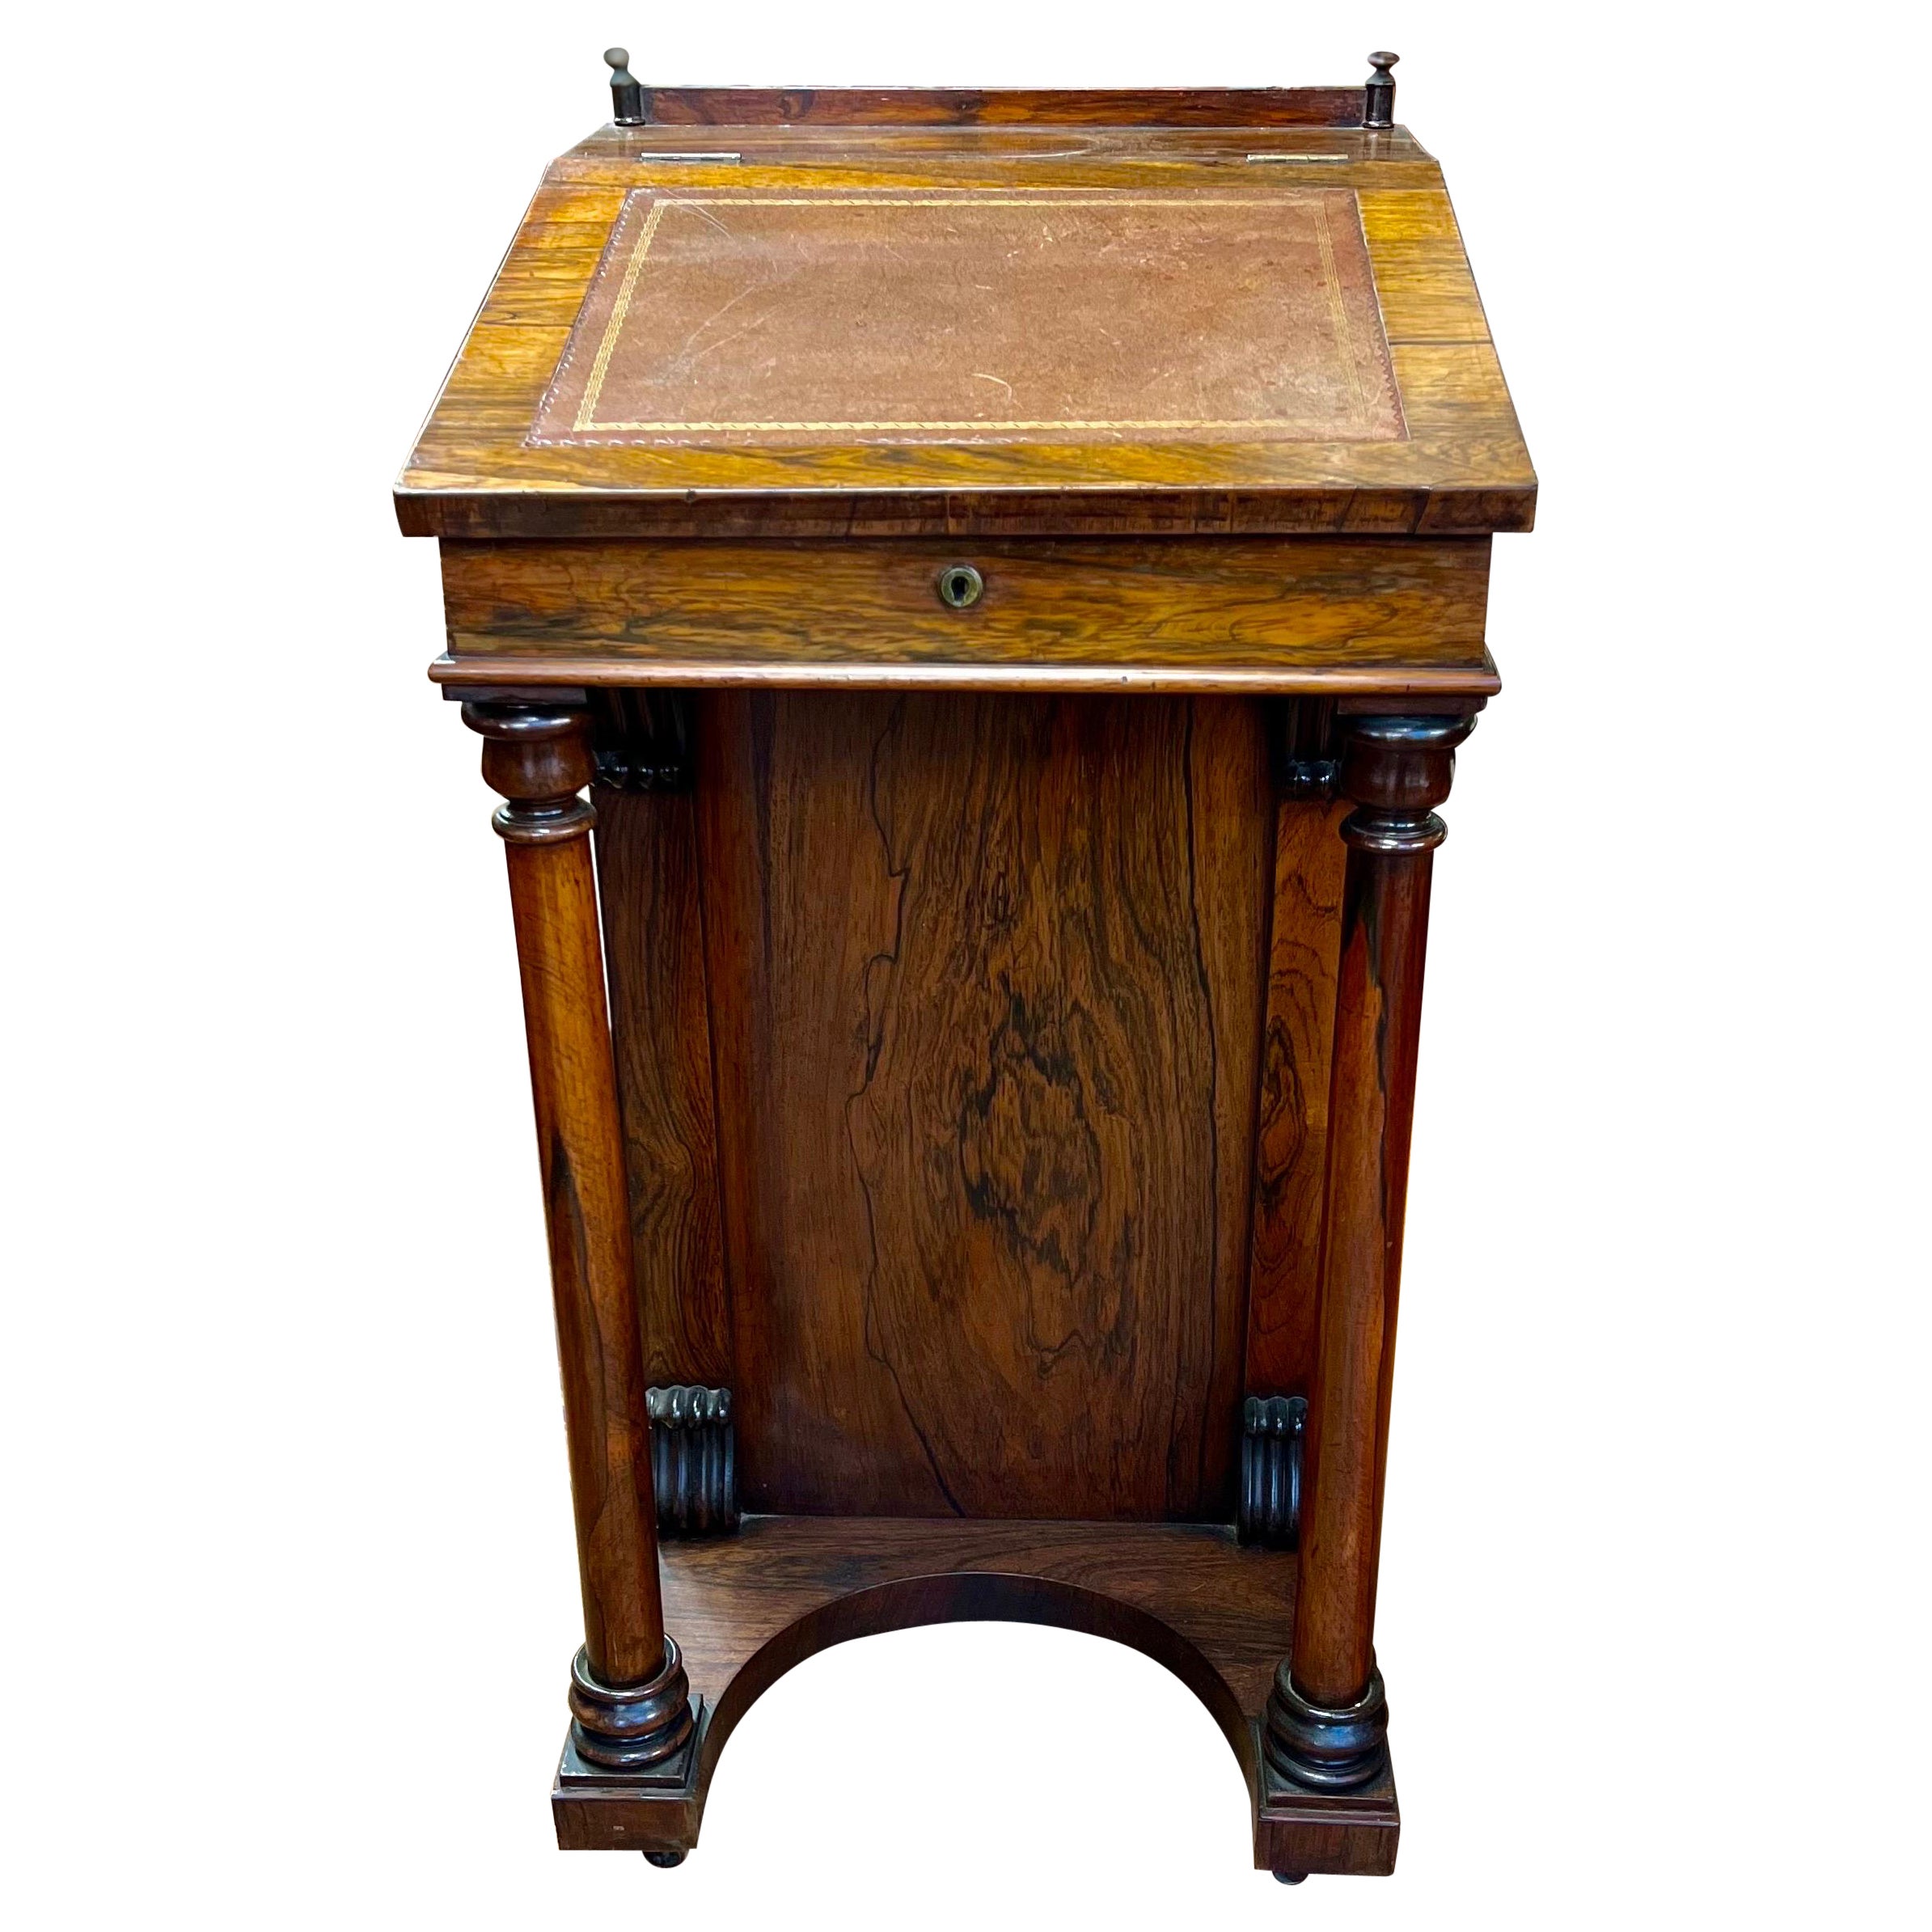 Rare Antique English Regency Rosewood Davenport with Spring-Loaded Pen Drawer For Sale